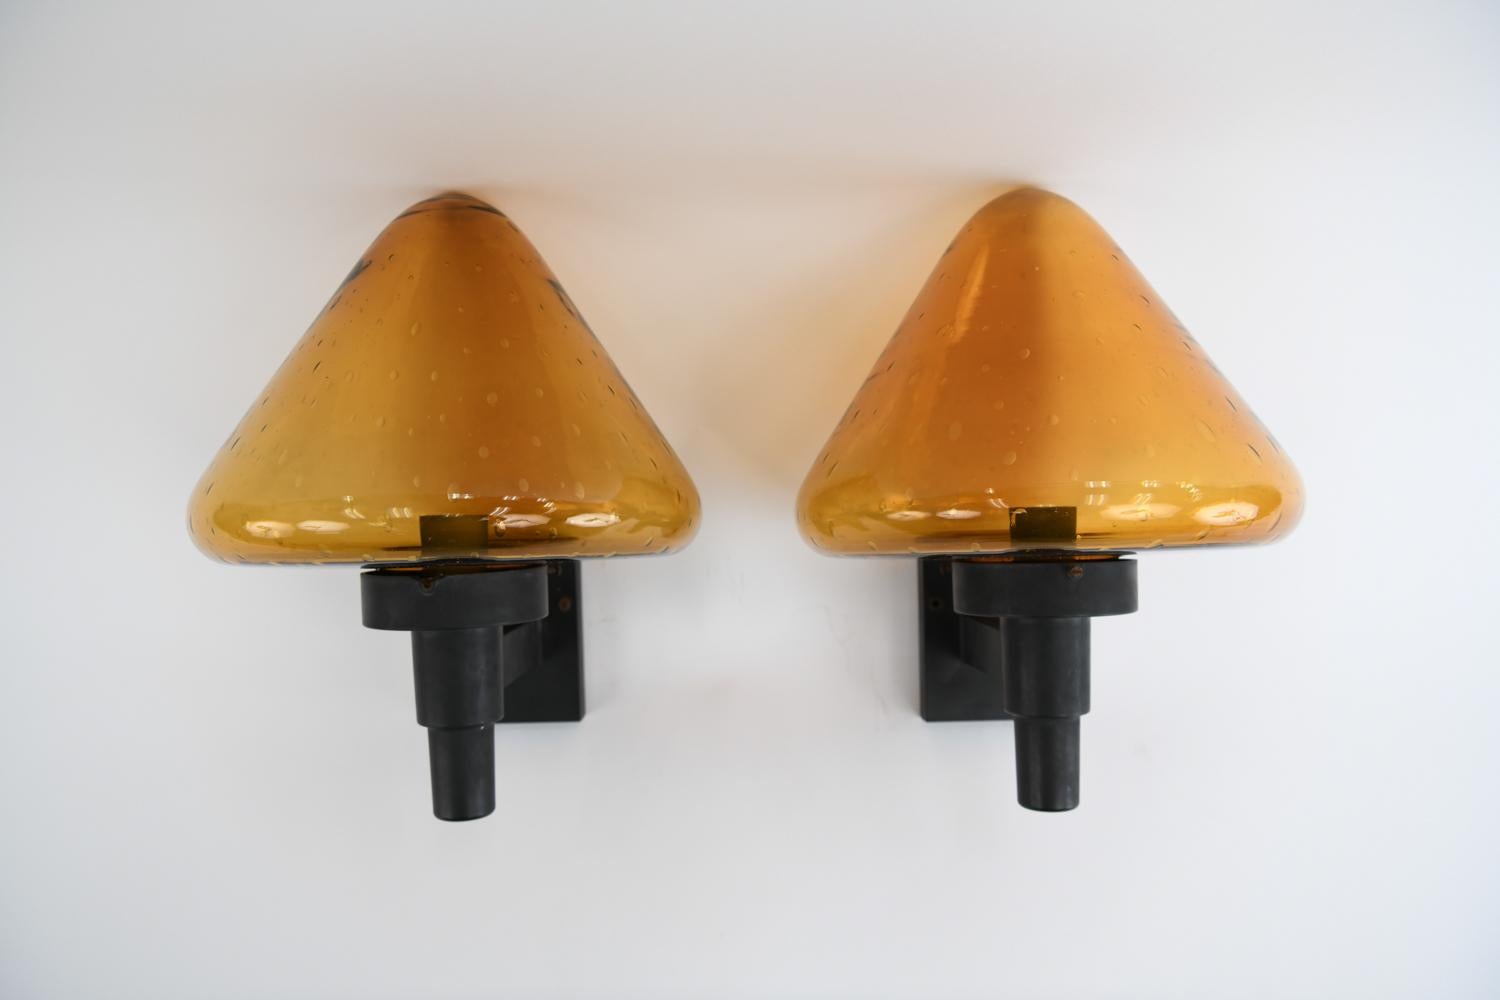 This fun pair of mushroom form shade outdoor sconce lamps is in the style of Hans Agne Jakobsson. Featuring orange bubble glass shades, these Danish midcentury lights would be a great, modern first impression to have on either side of your front